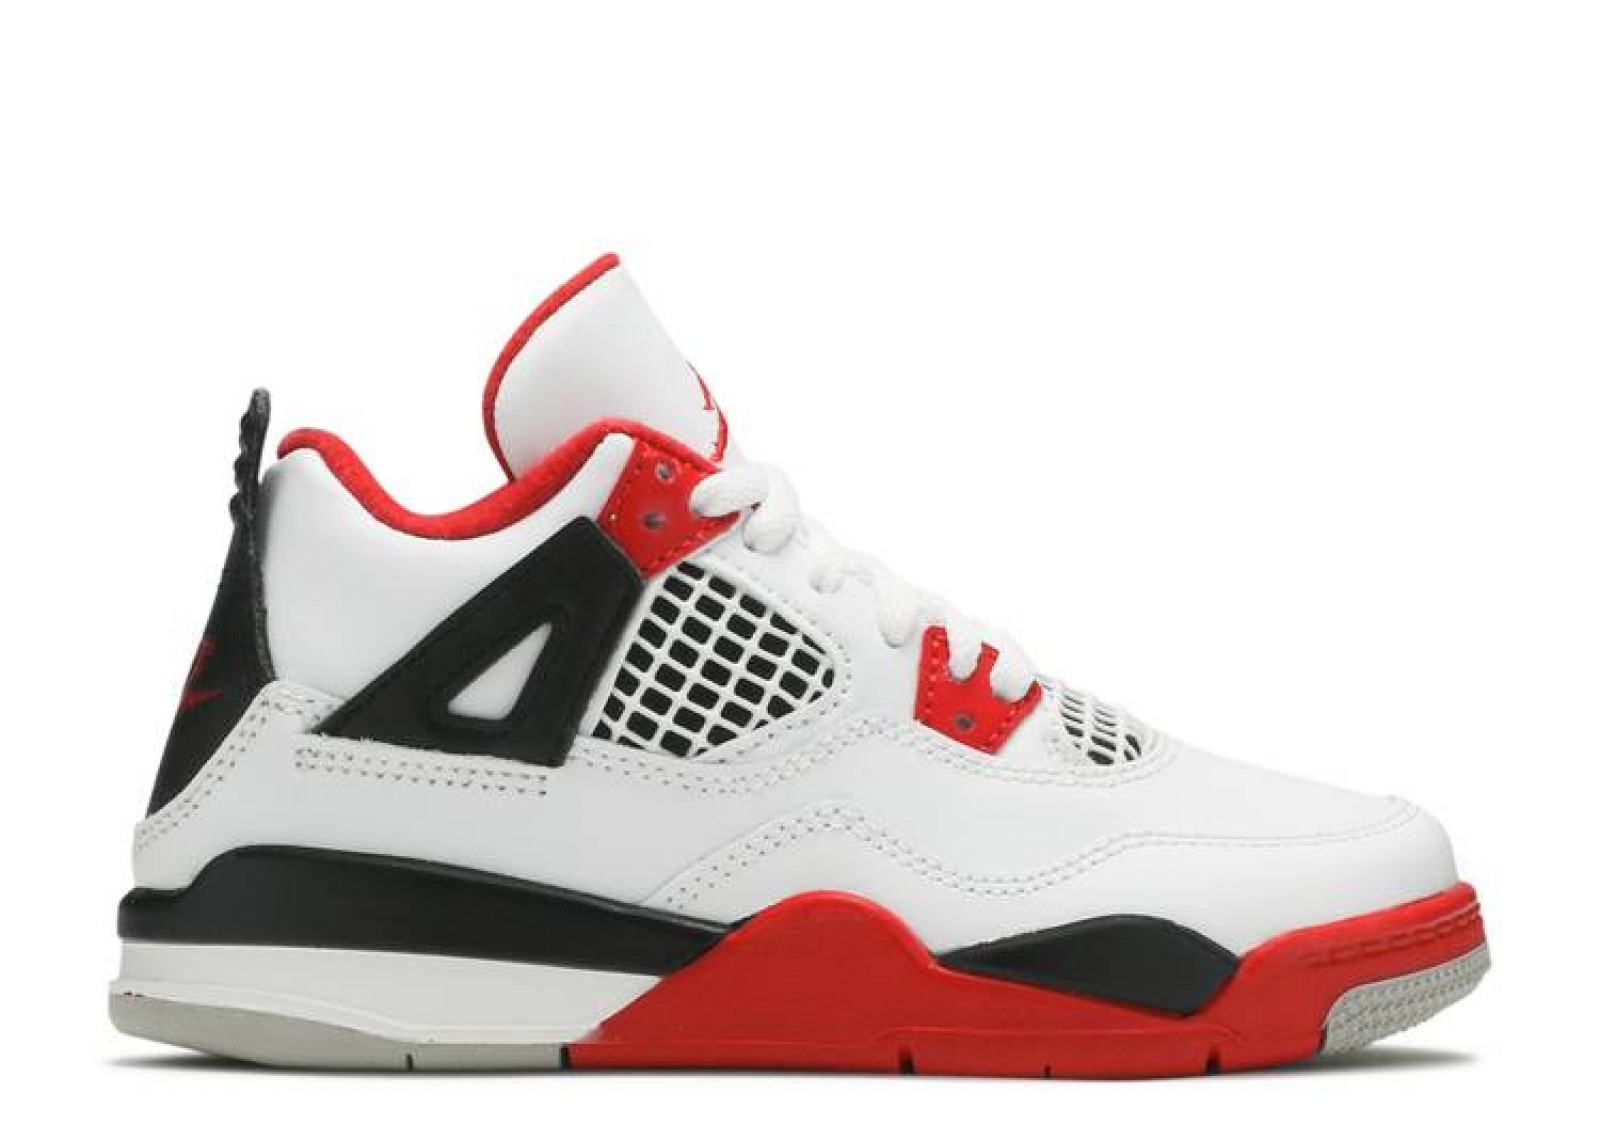 fire red 4s retail price